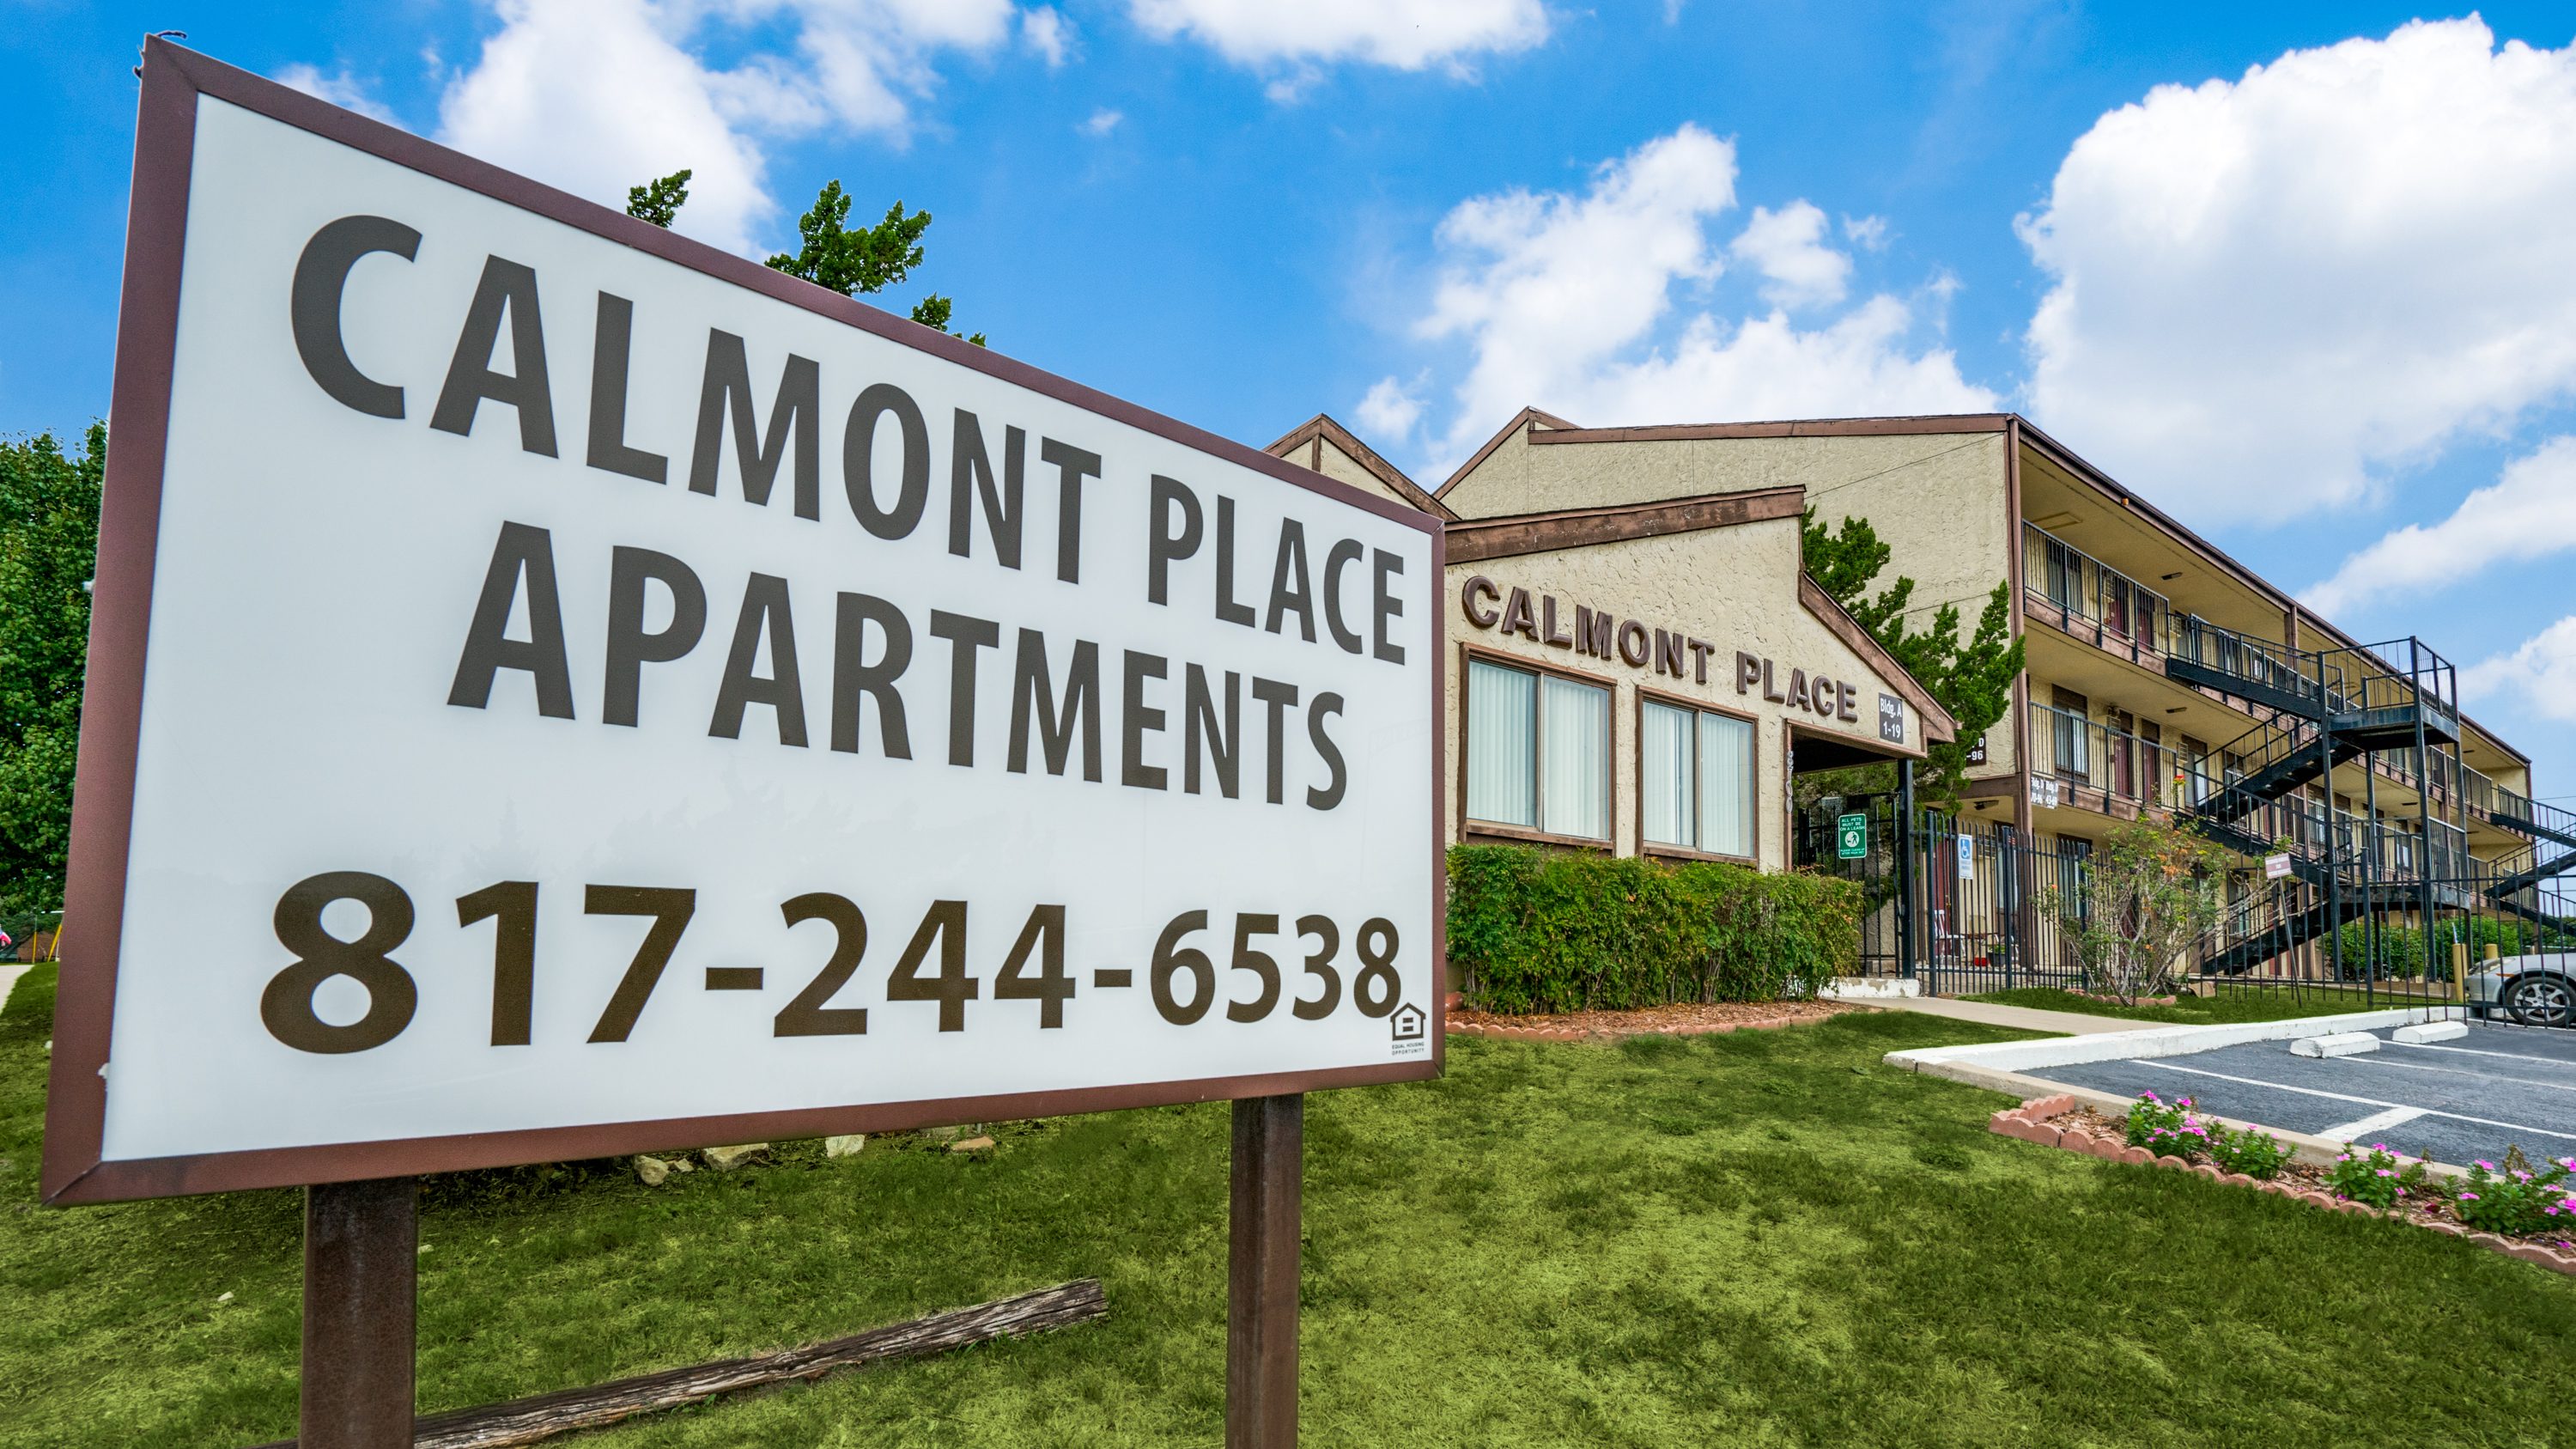 Signage and buildings for Calmont Place in Fort Worth, Texas.